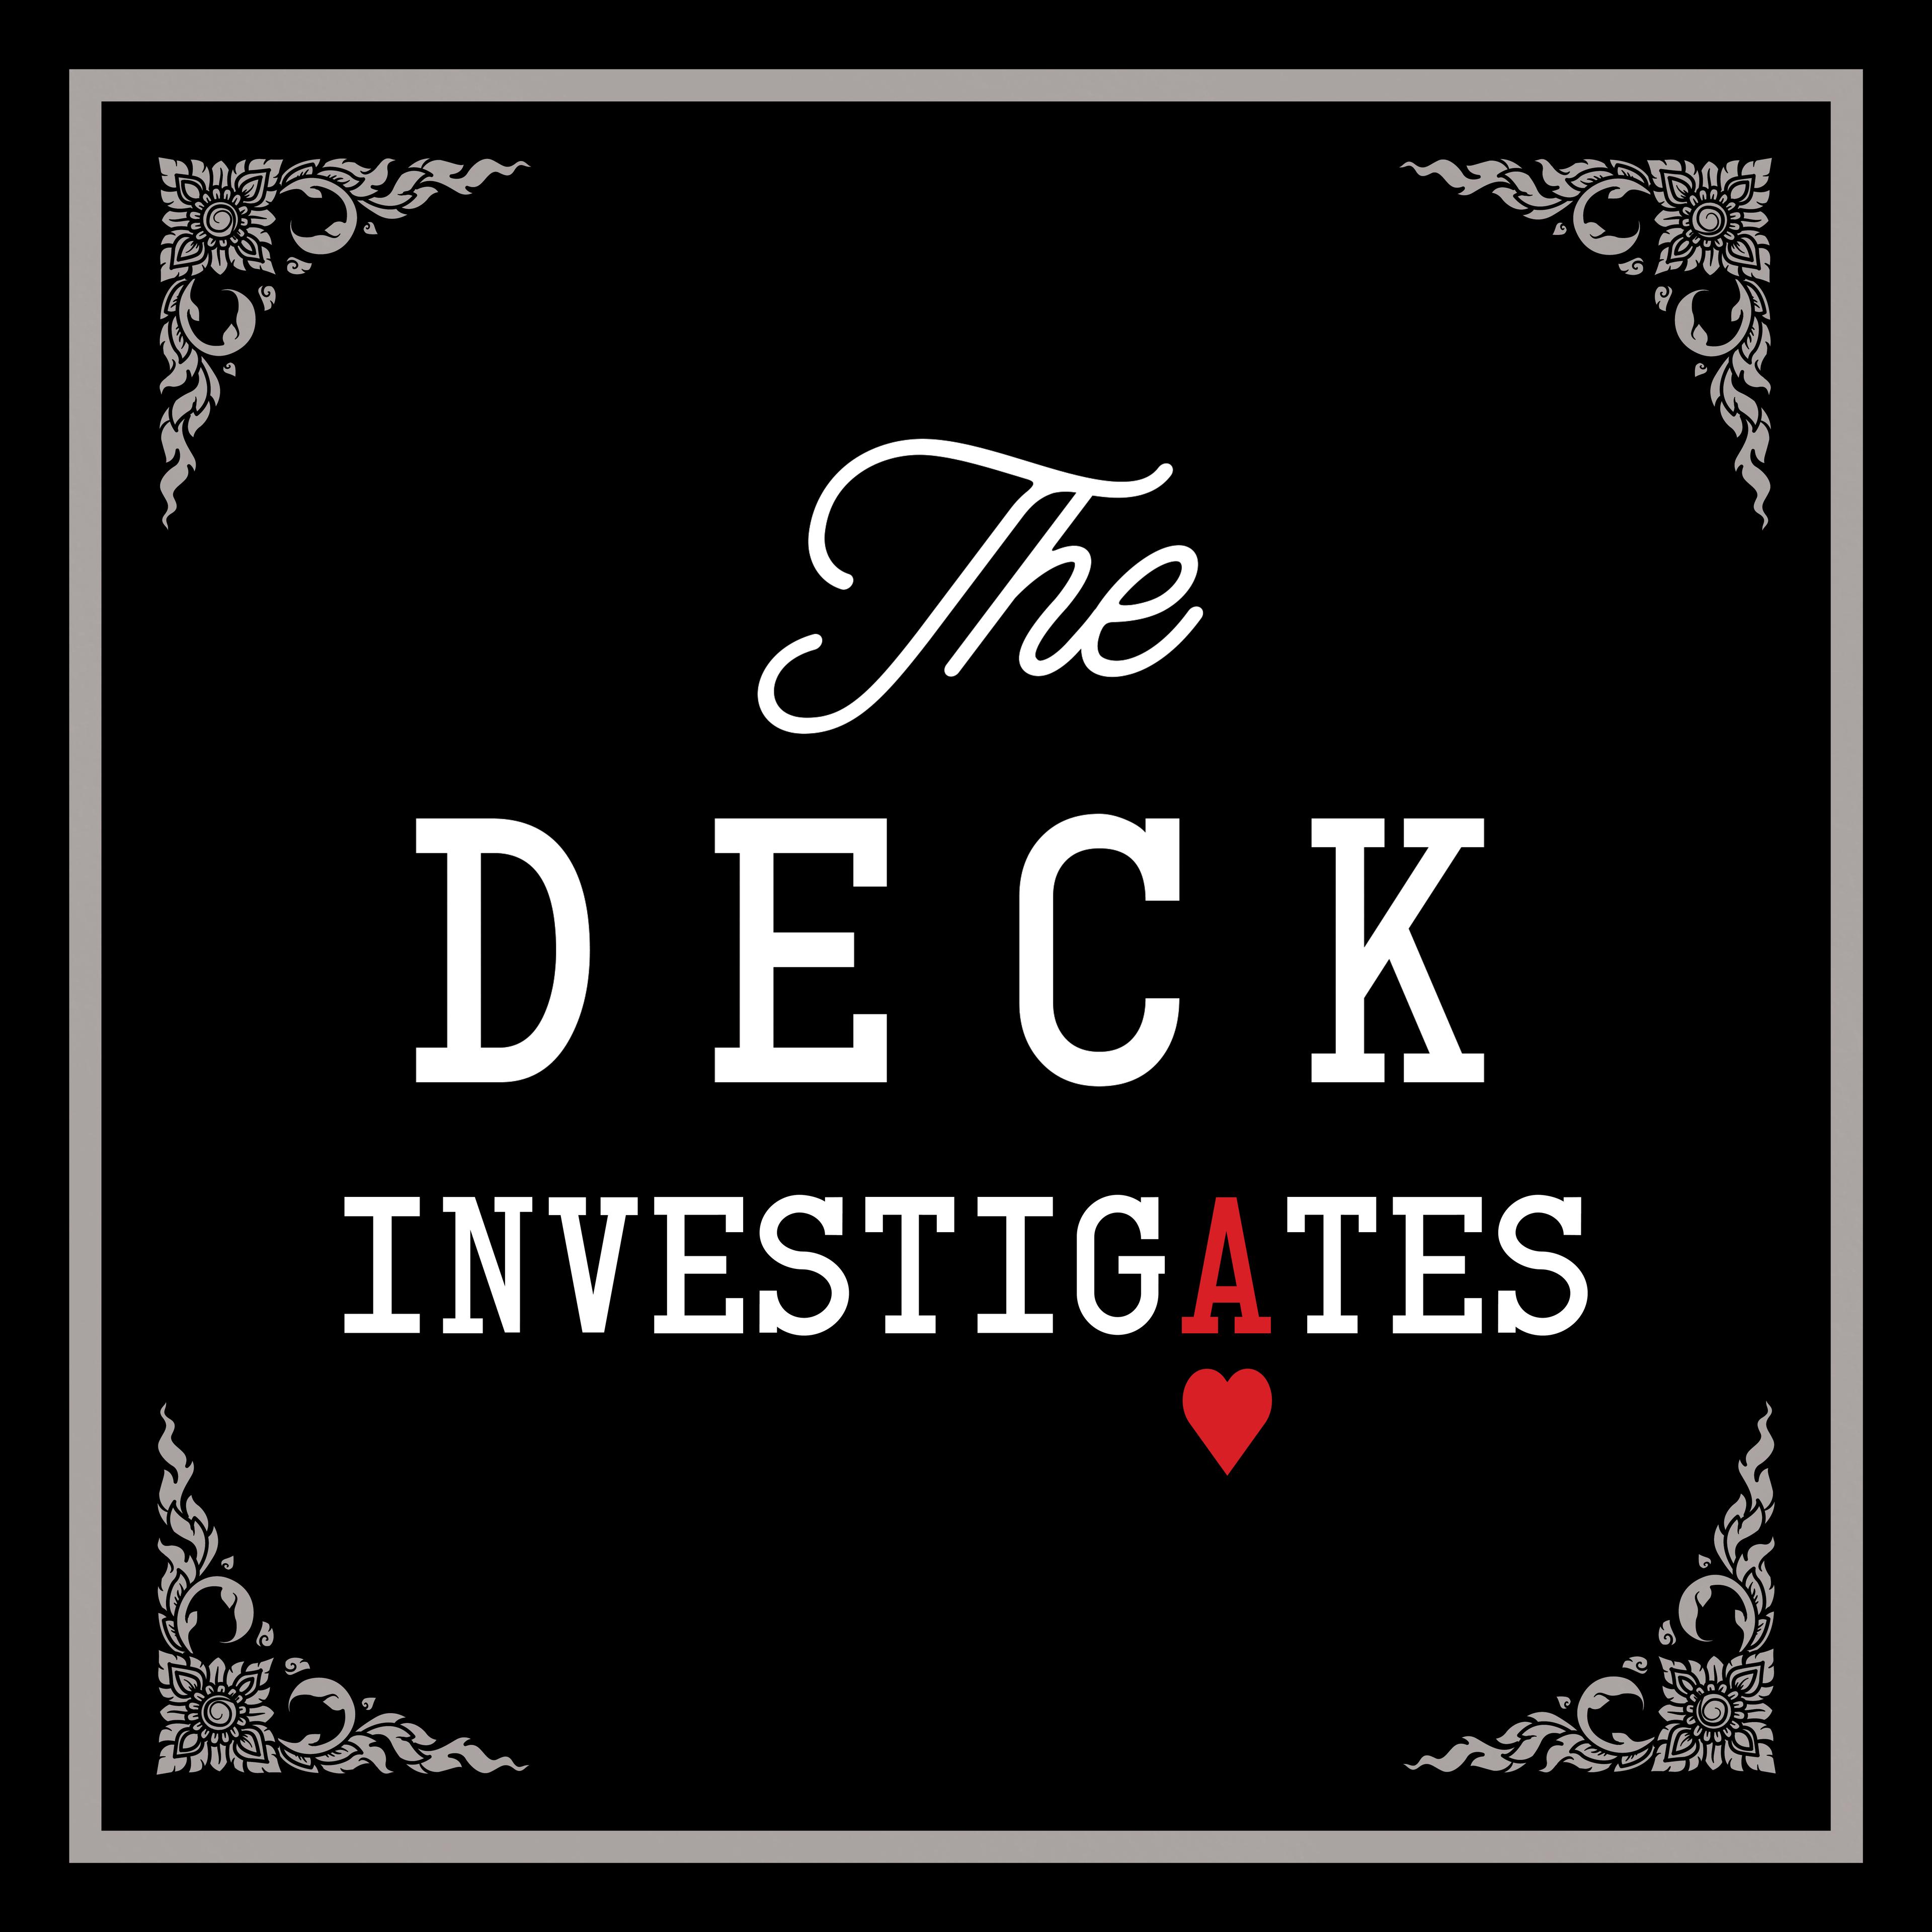 Show poster of The Deck Investigates